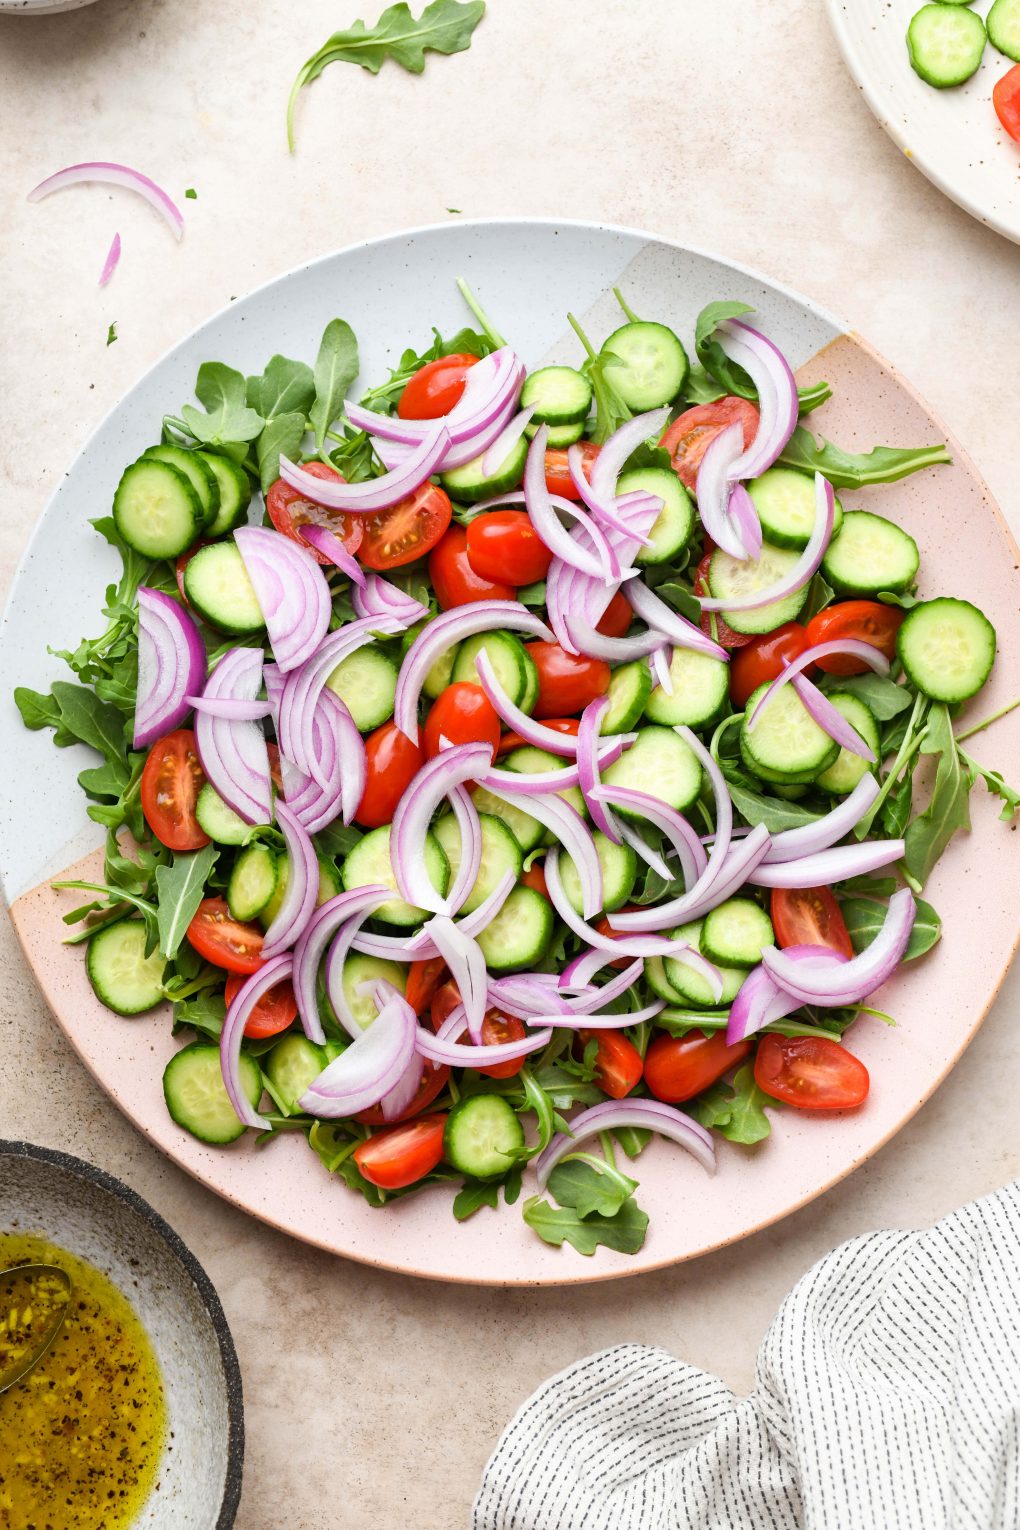 Image of large platter with arugula, cut cucumber, tomatoes, and thinly sliced red onion. On a light beige background.